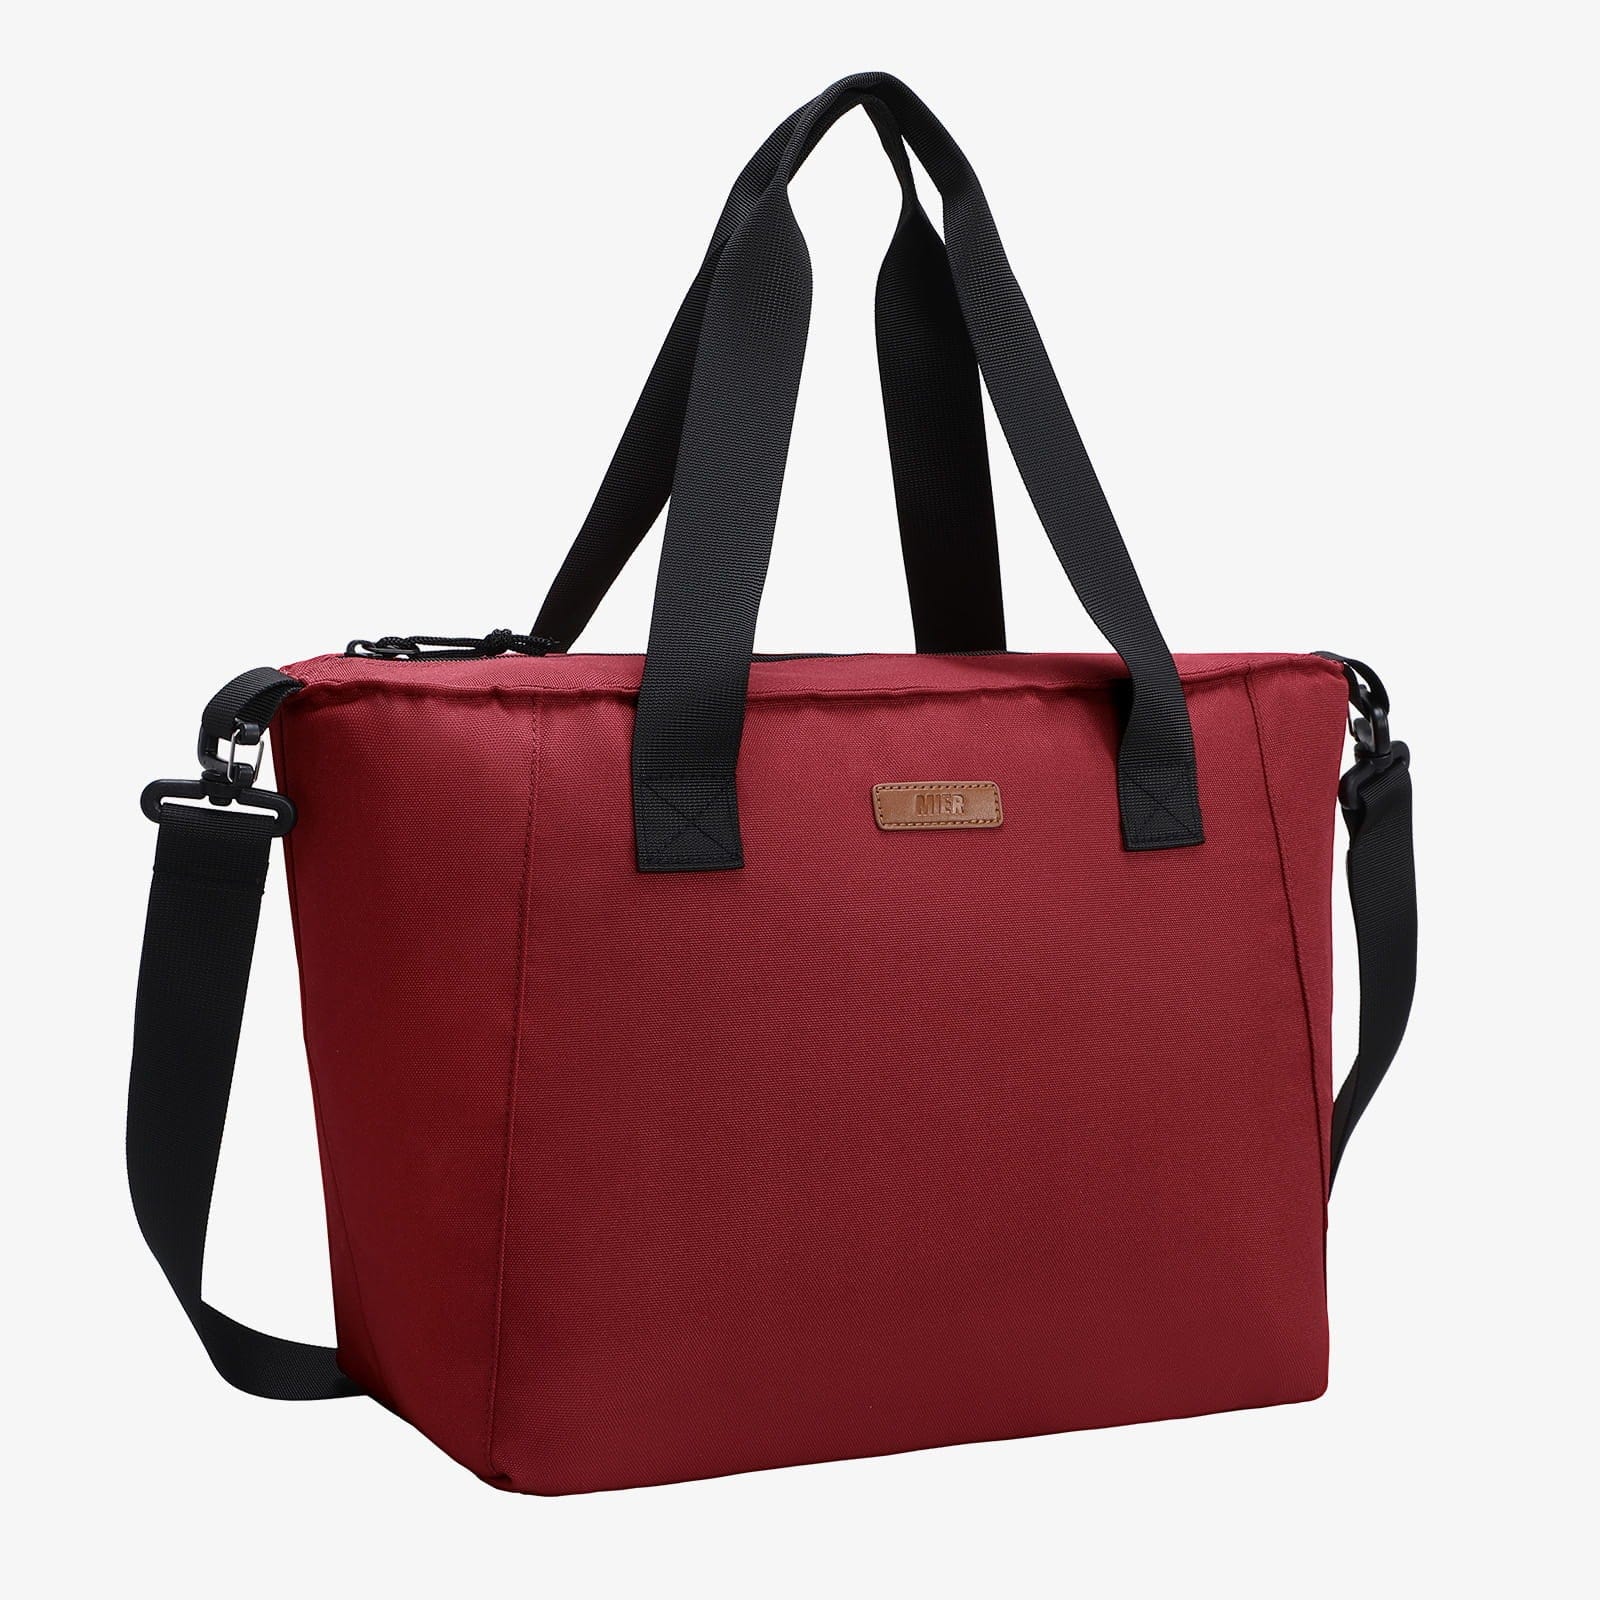 https://www.miersports.com/cdn/shop/files/large-lunch-bags-for-women-insulated-lunch-tote-bag-mier-31705641517190.jpg?v=1691031979